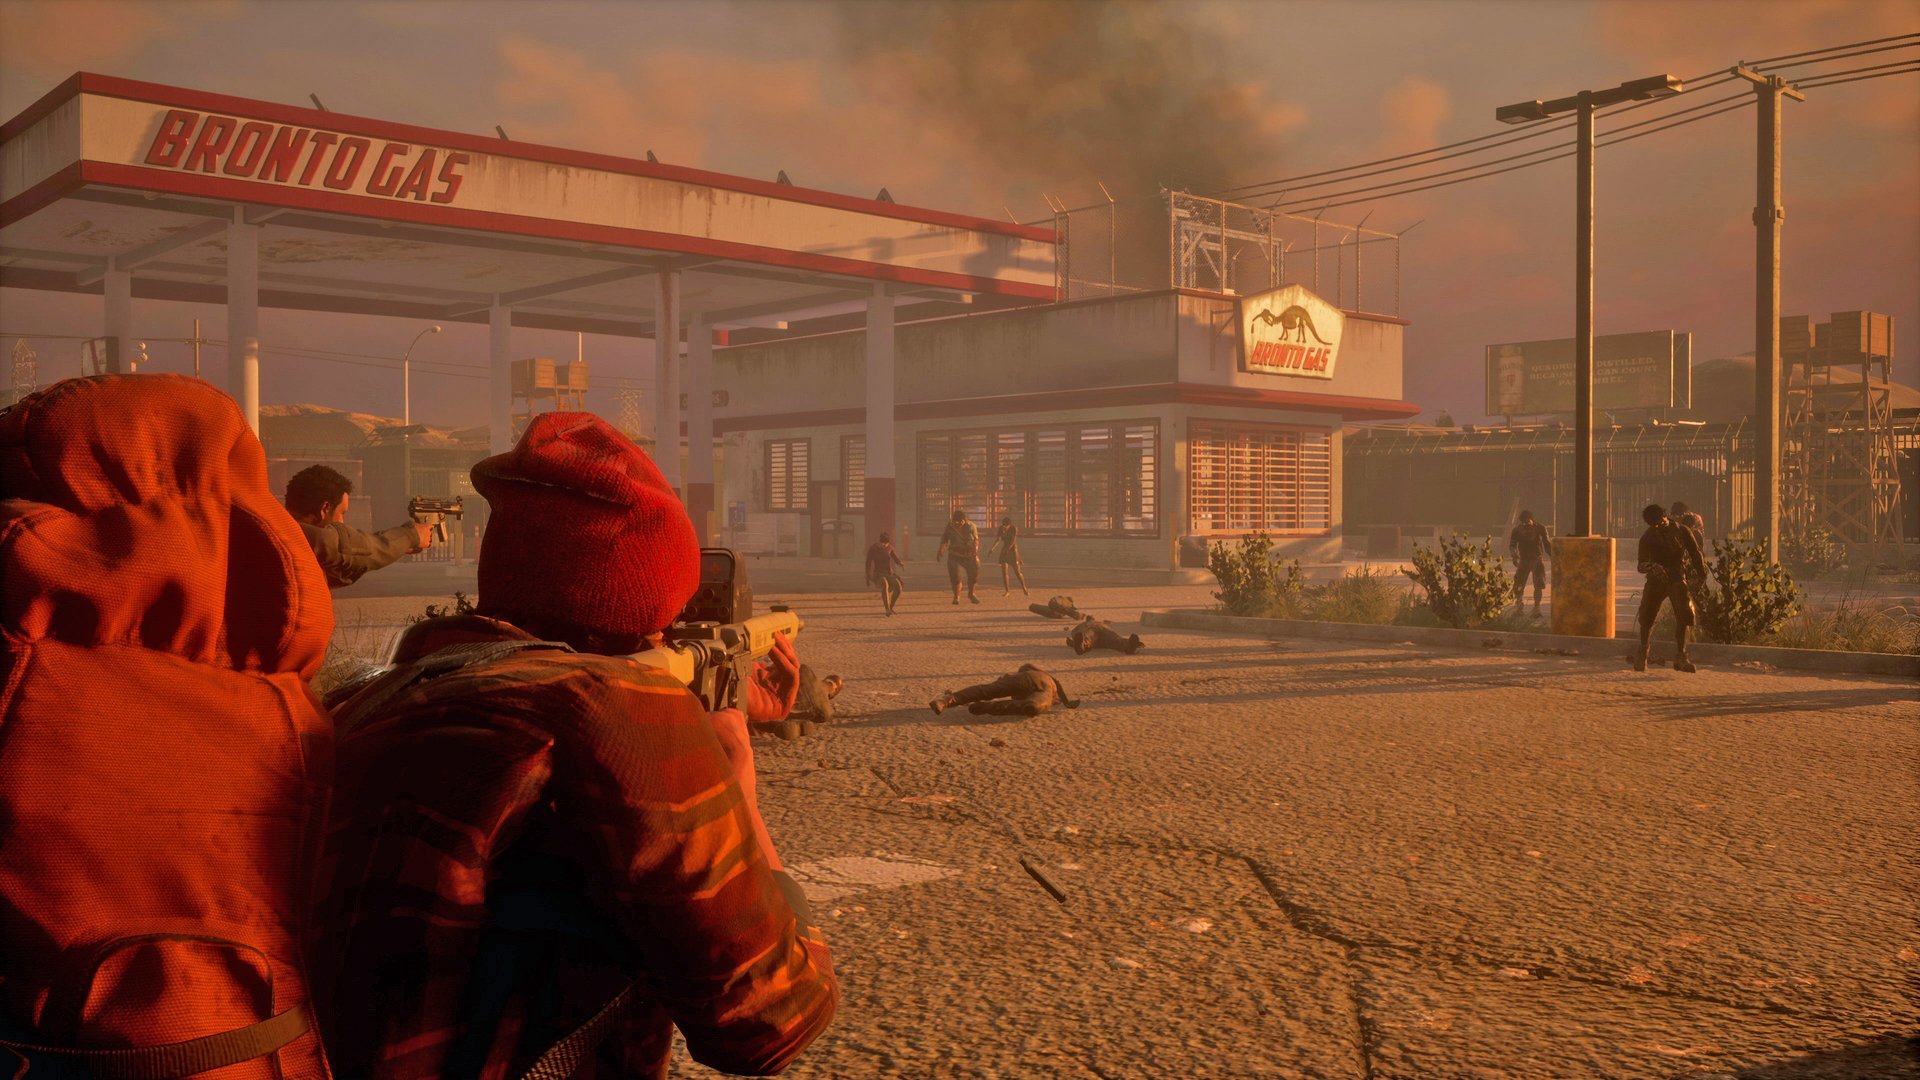 State Of Decay 2 Features New Gameplay Trailer To Celebrate PAX East